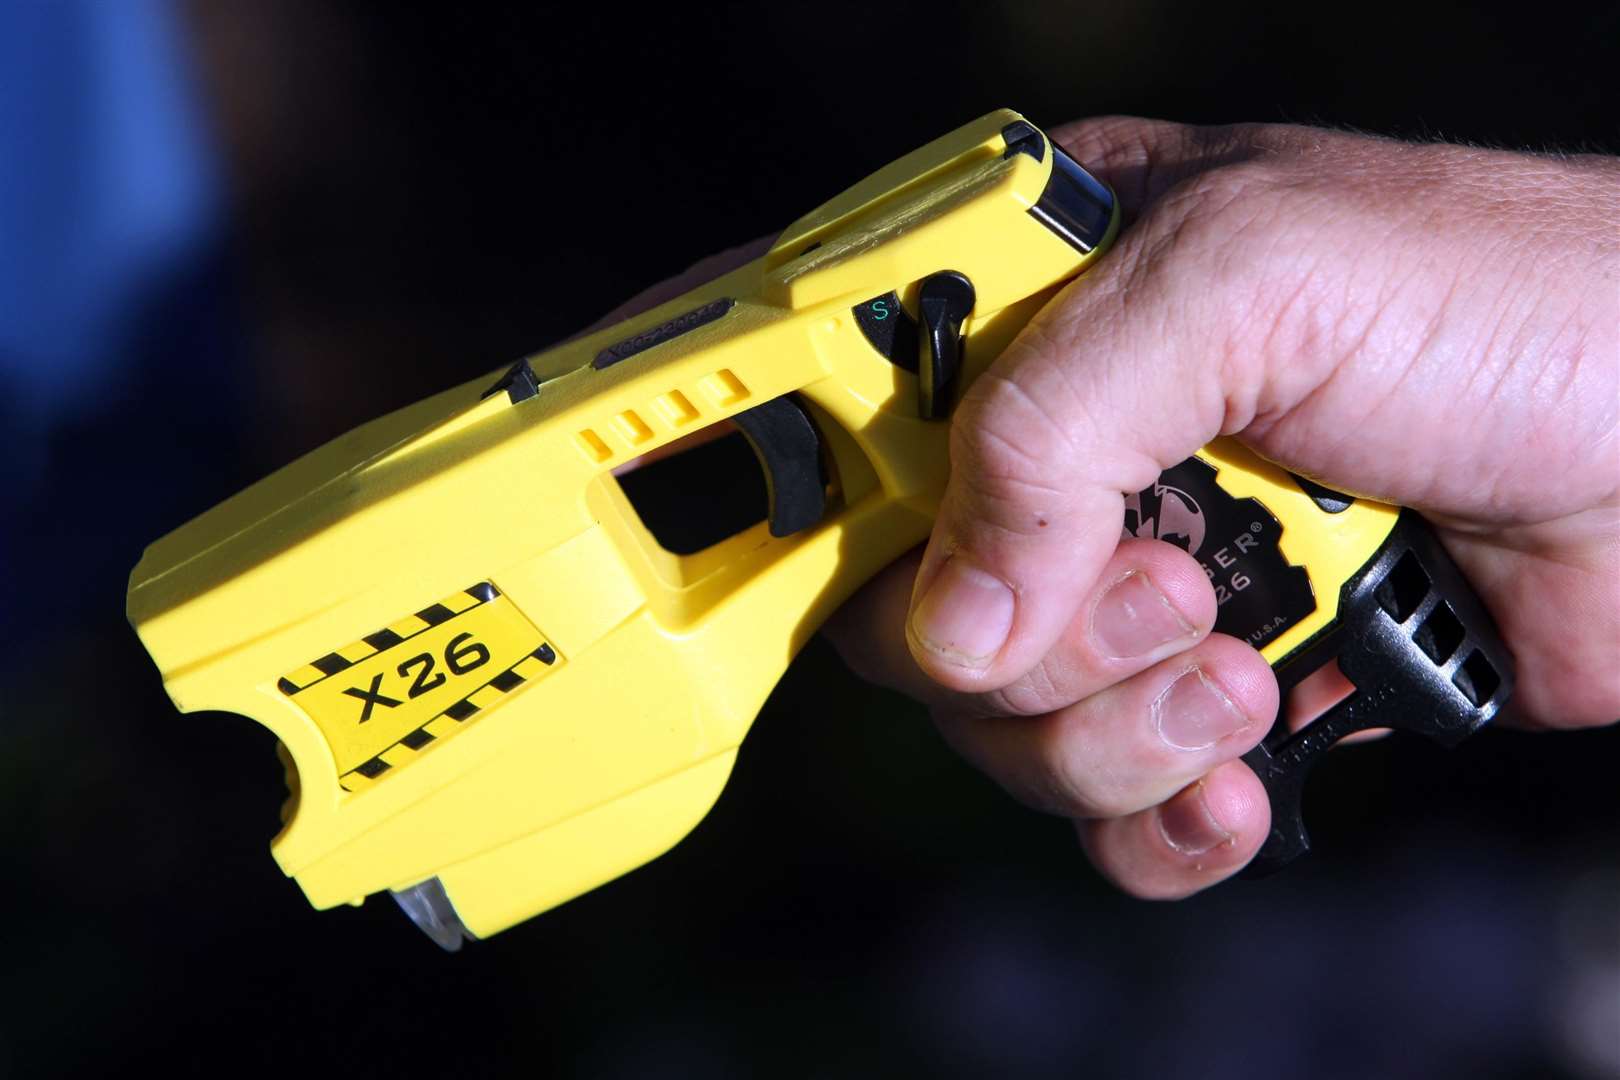 Voluntary police officers could soon be armed with Tasers